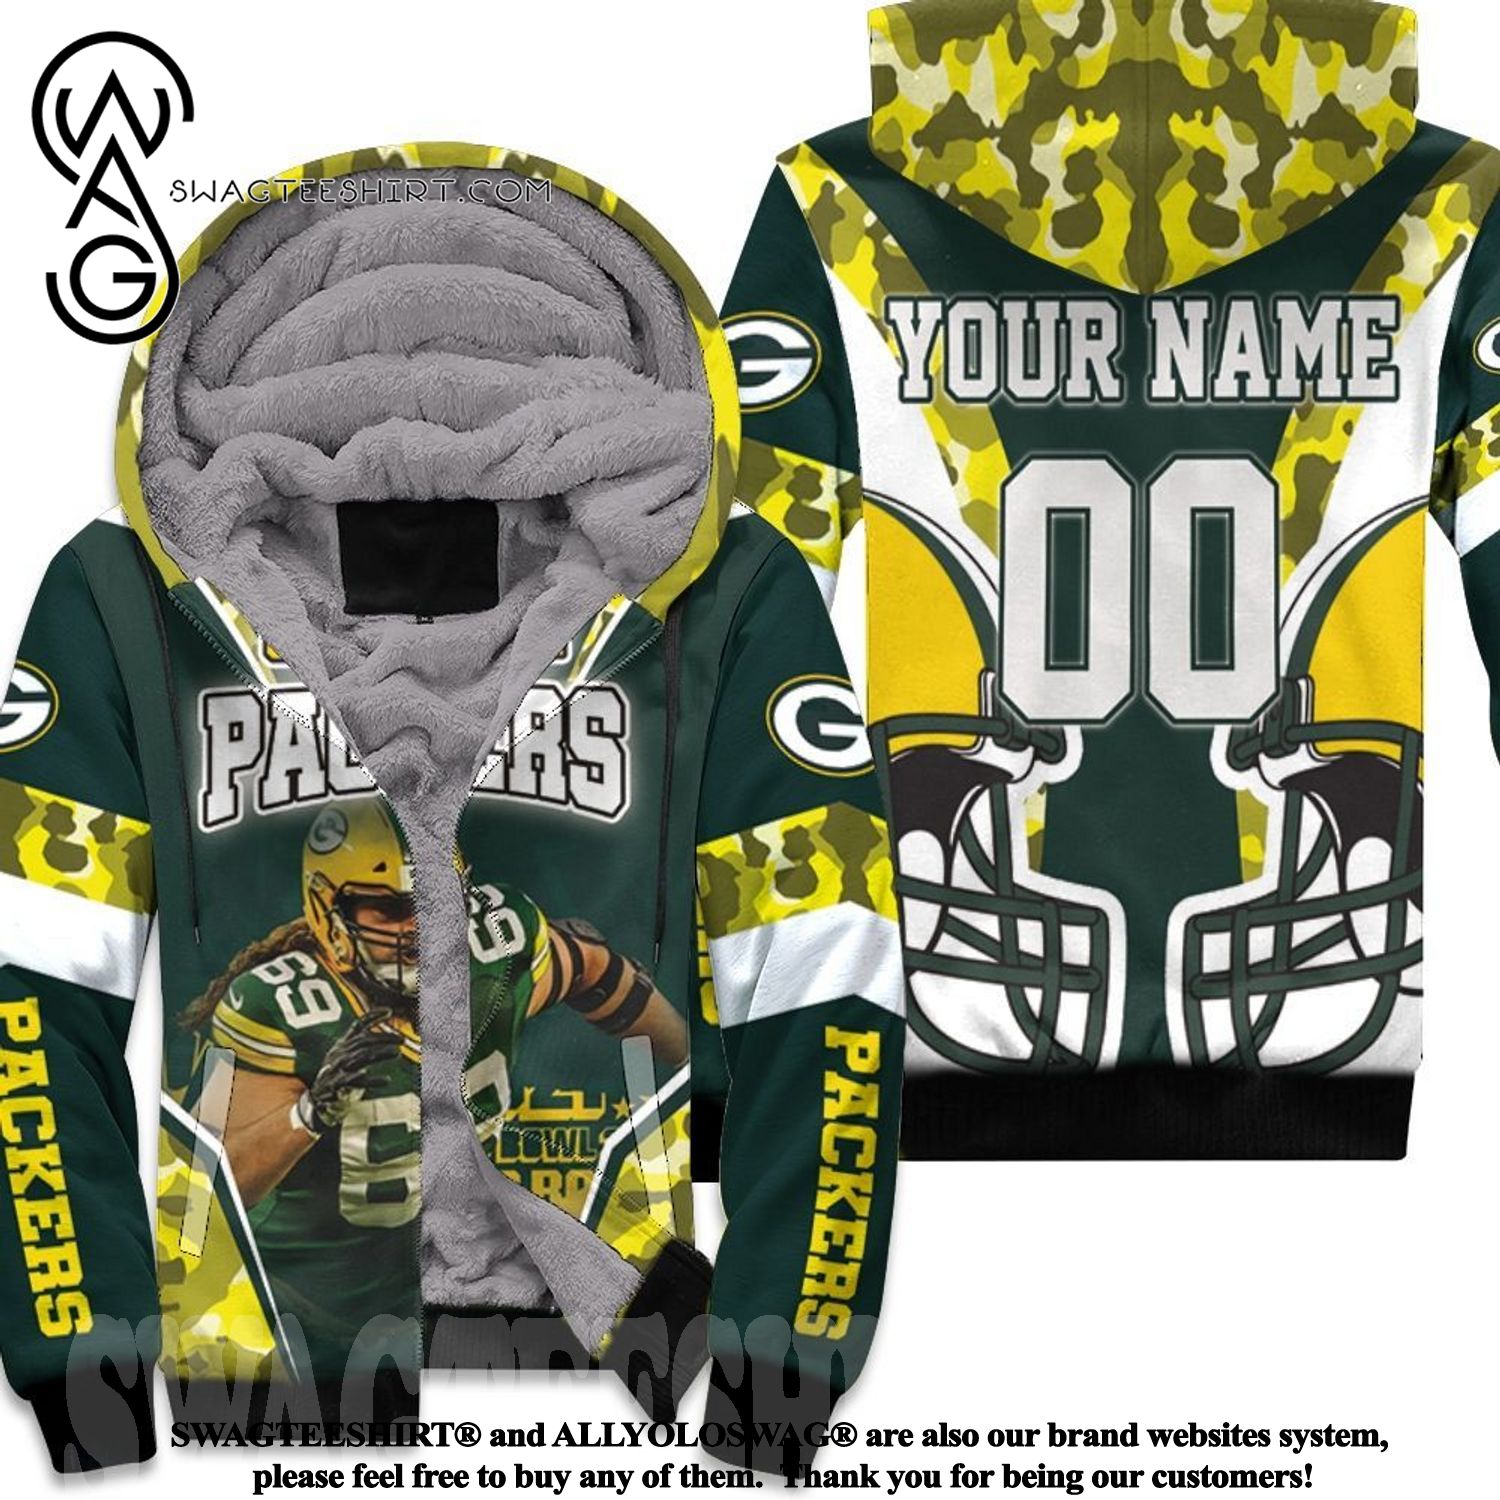 David Bakhtiari 69 Green Bay Packers NFC North Champions Super Bowl Personalized Hot Version All Over Printed Fleece Hoodie